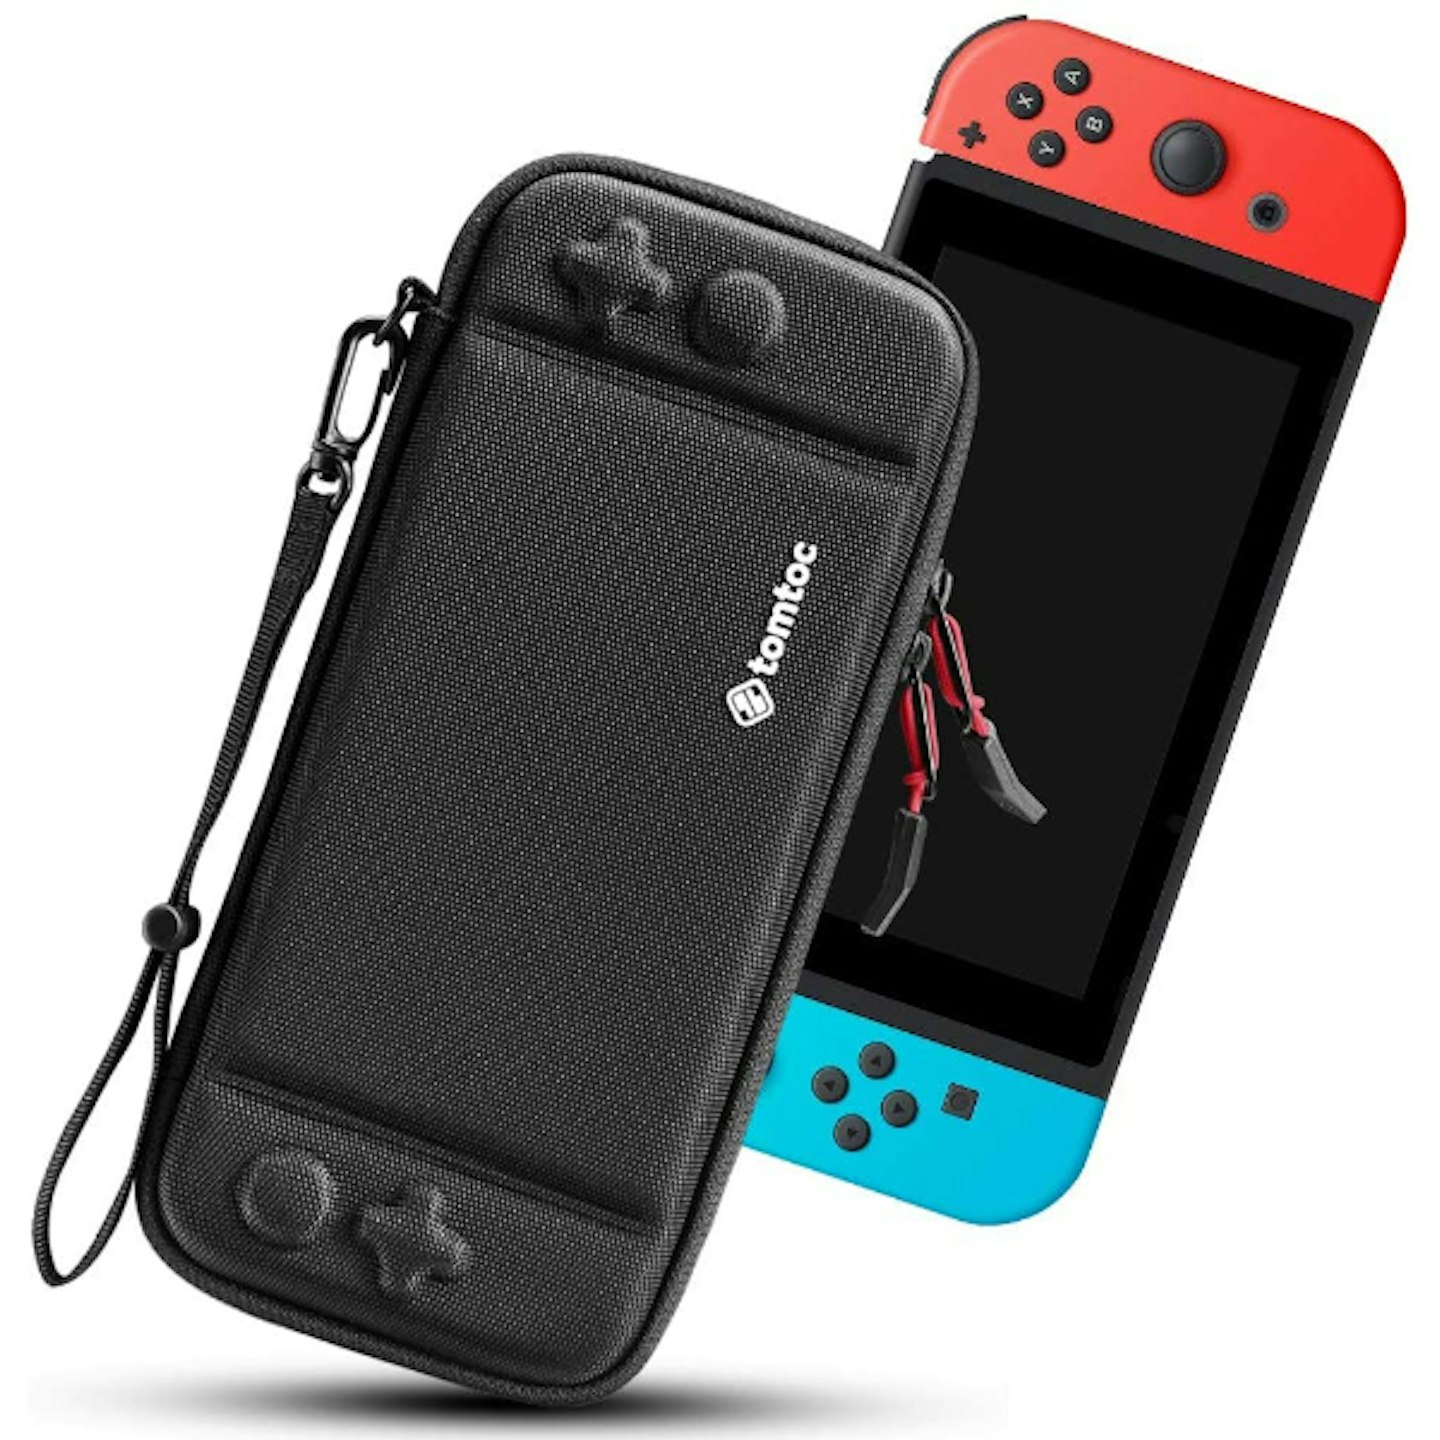 Tomtoc Slim Case For Nintendo Switch